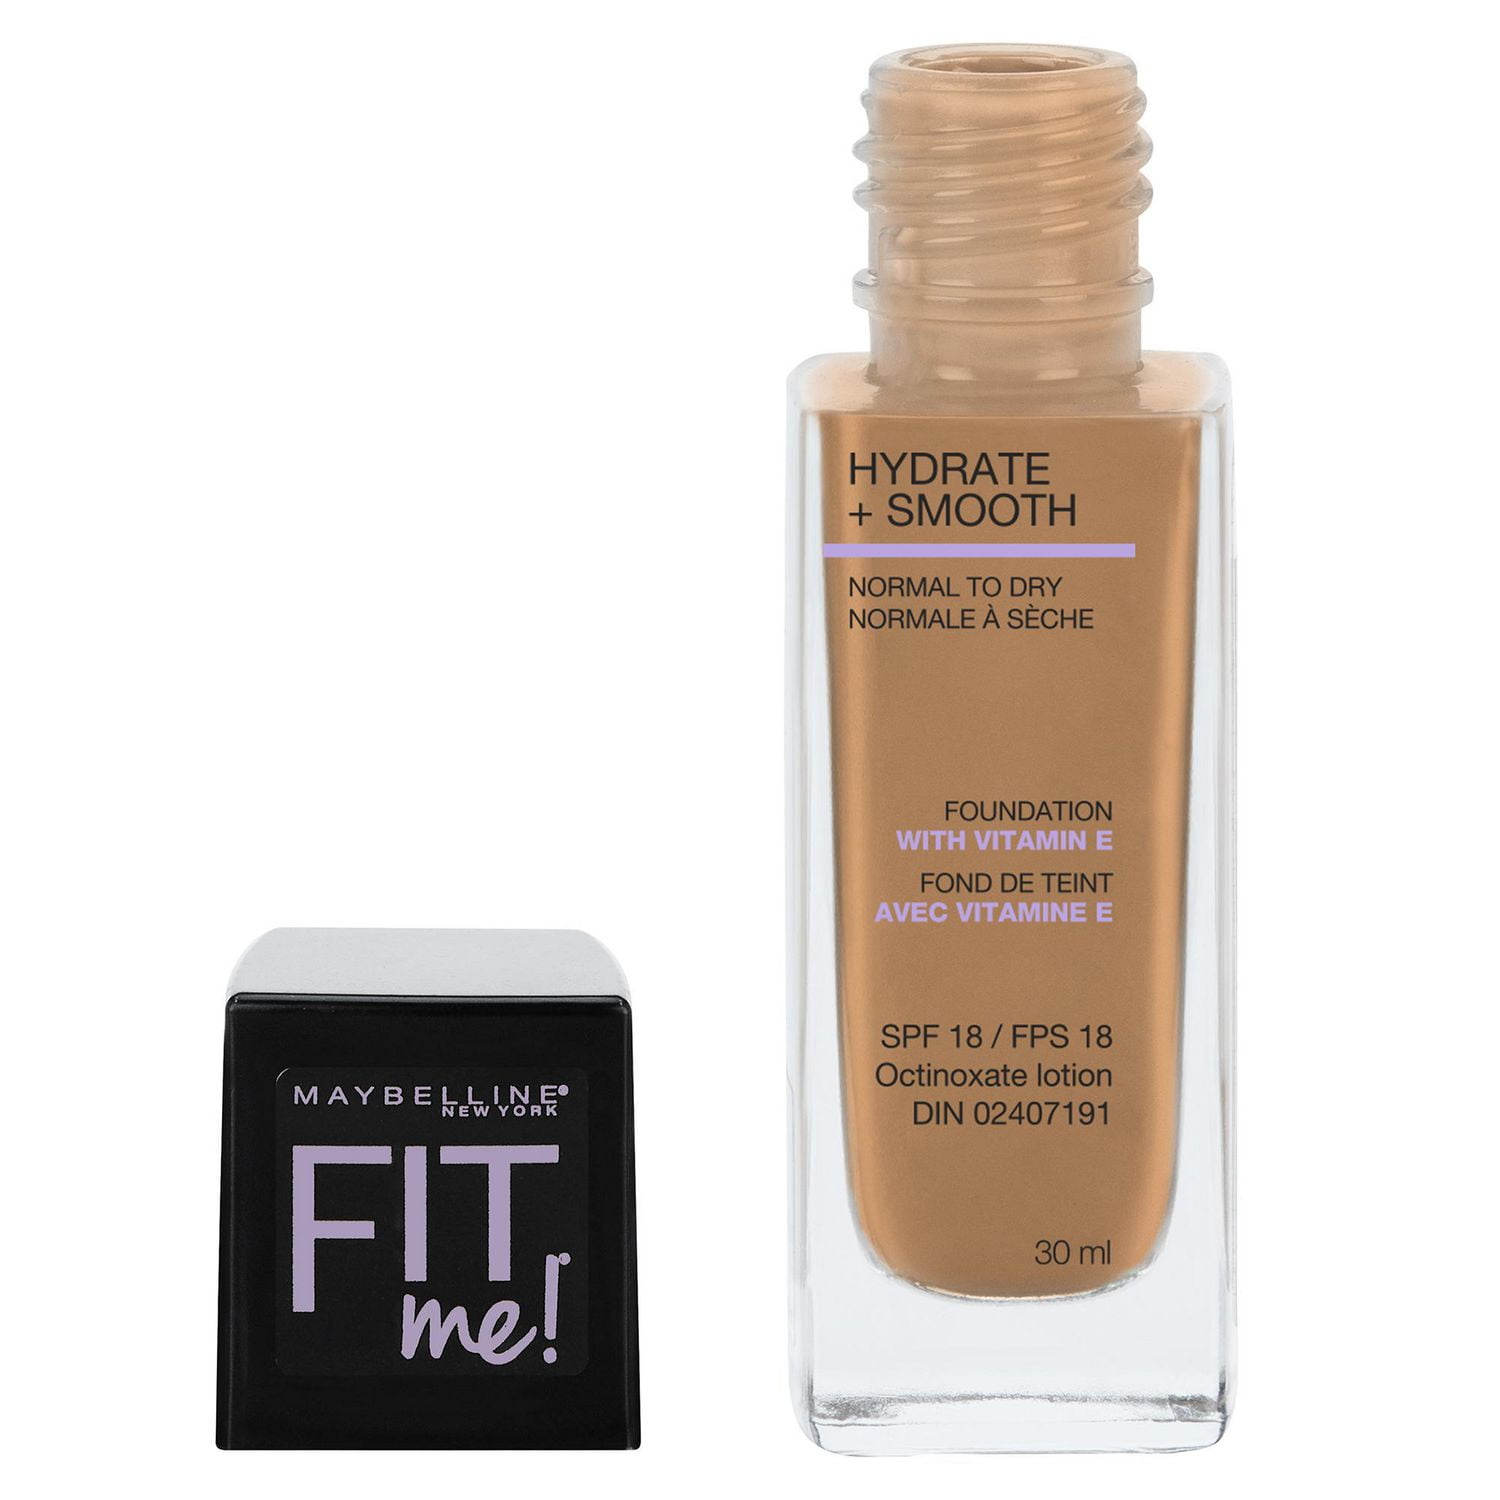 Maybelline New York Fit Me®, Hydrate + Smooth Liquid Foundation